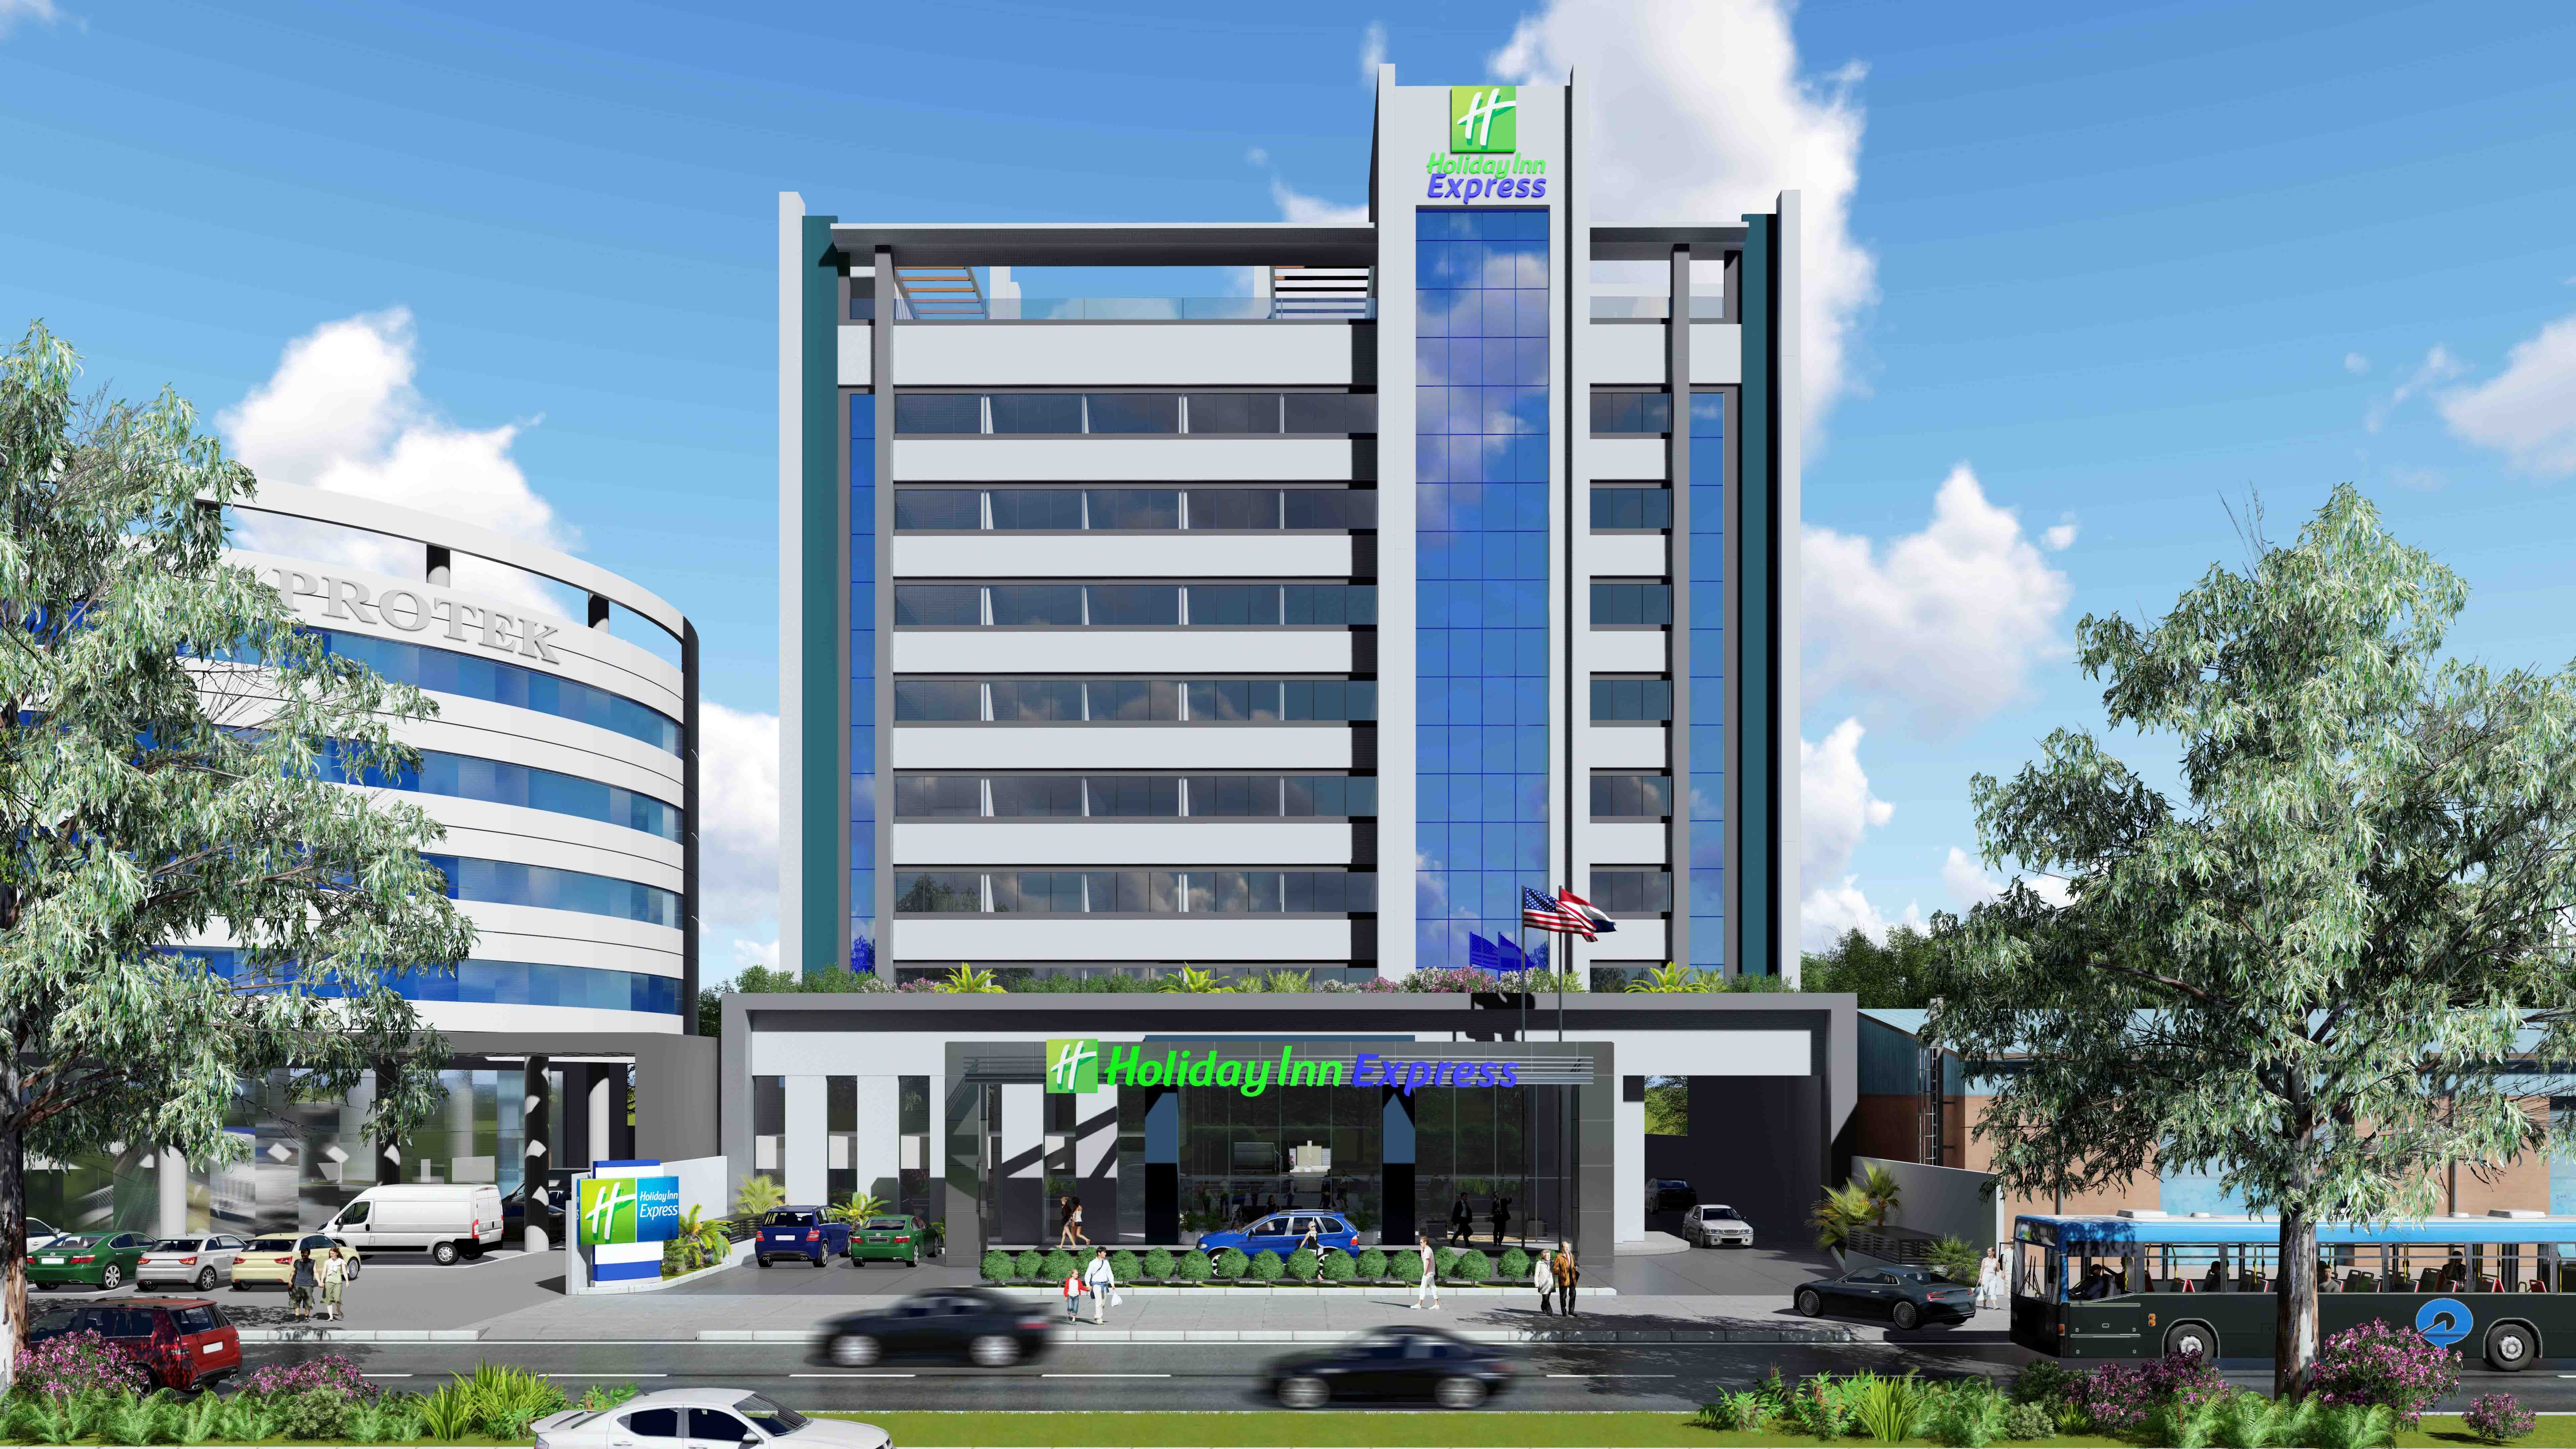 IHG announces first Holiday Inn Express® hotel in Paraguay — the Holiday Inn Express® Asuncion Aviadores hotel